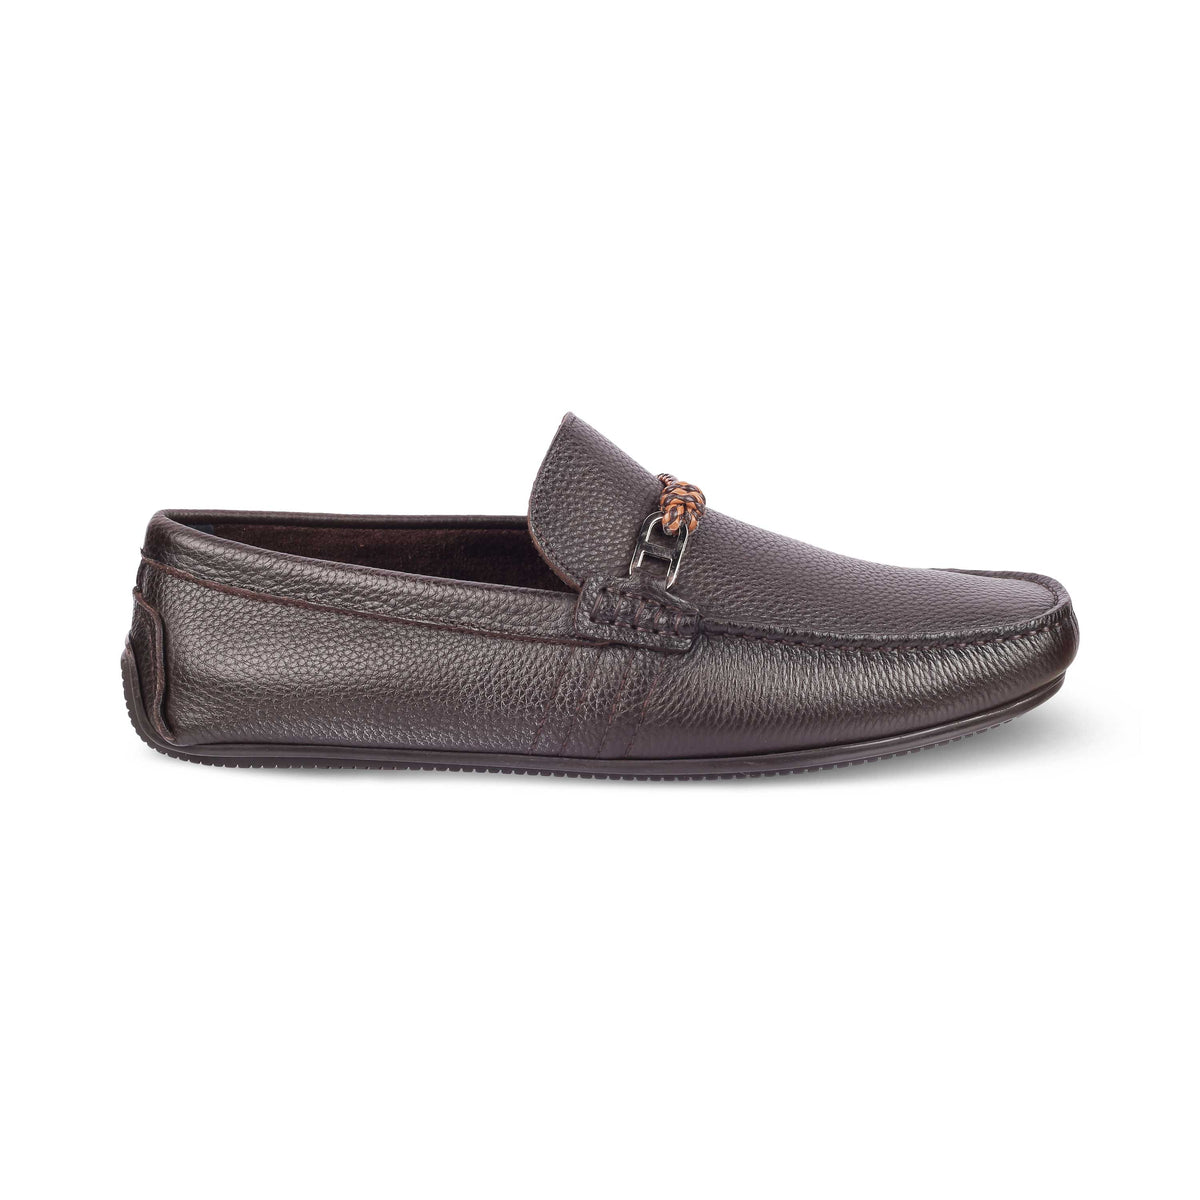 Tresmode Monoc Brown Men's Leather Driving Loafers - Tresmode